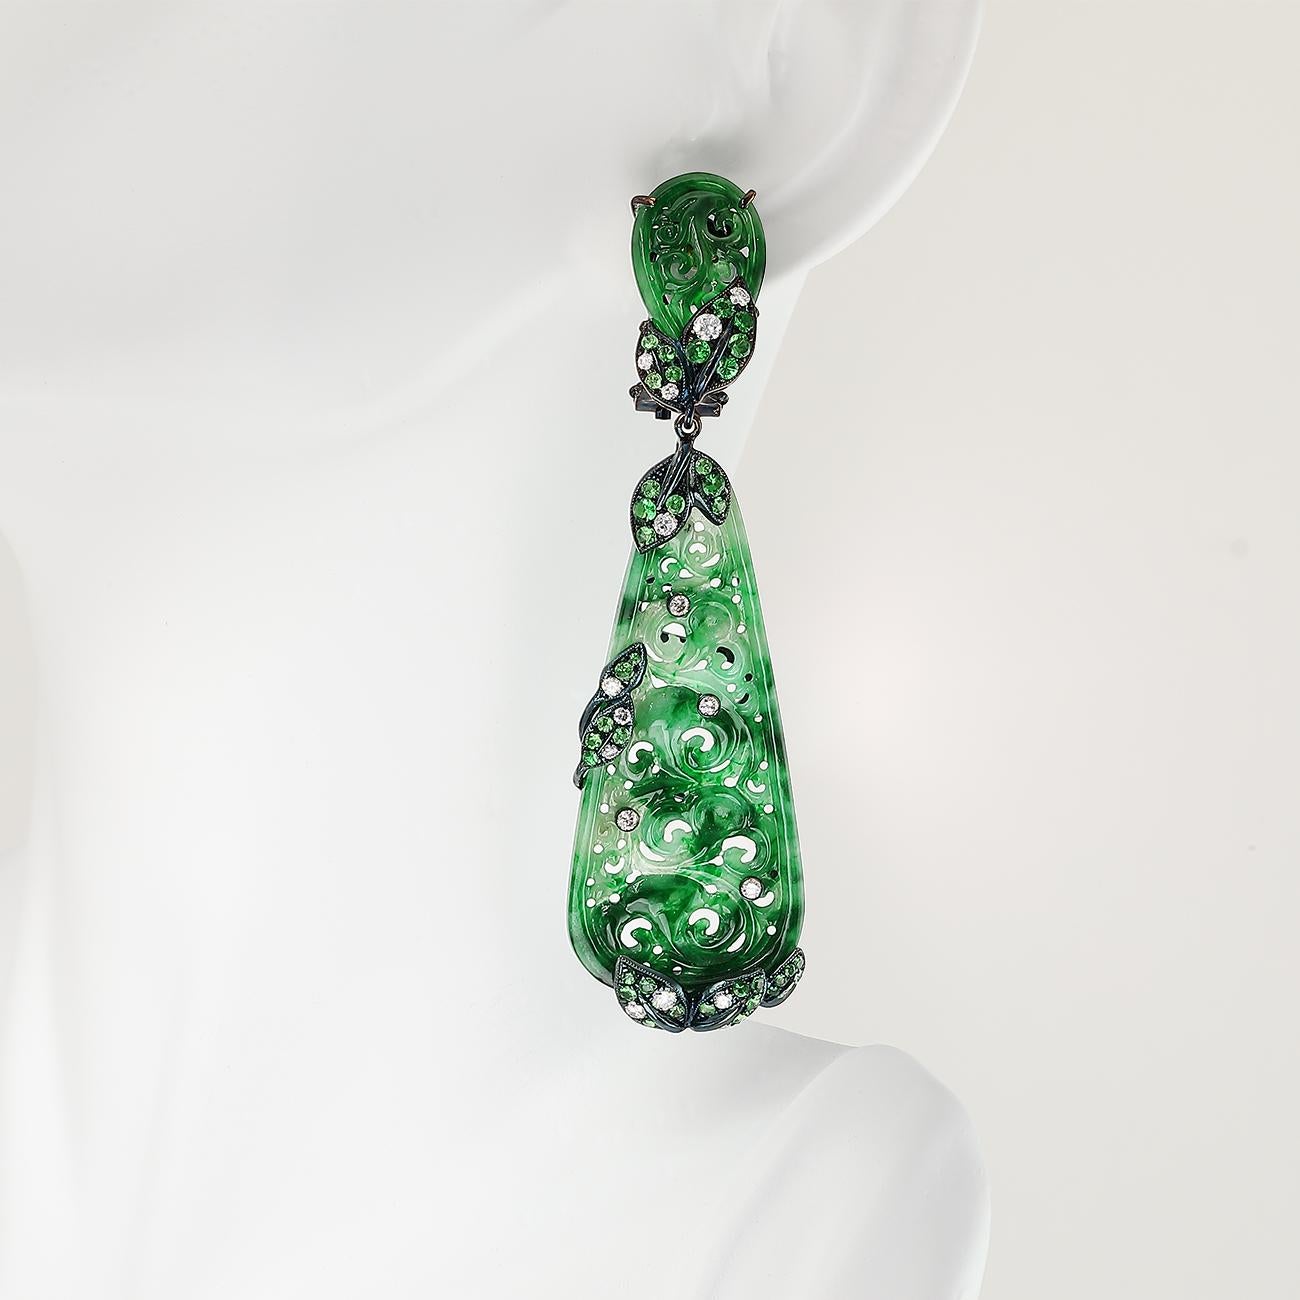 Stunning and intricately carved jade, sprinkled with diamonds and tsavorite garnets make up this unique piece from the de Boulle Collection.

• Jade (28.05 ctw.)
• Diamonds (1.15 ctw.)
• Tsavorite Garnets (2.53 ctw.)
• 18K white gold with blackened